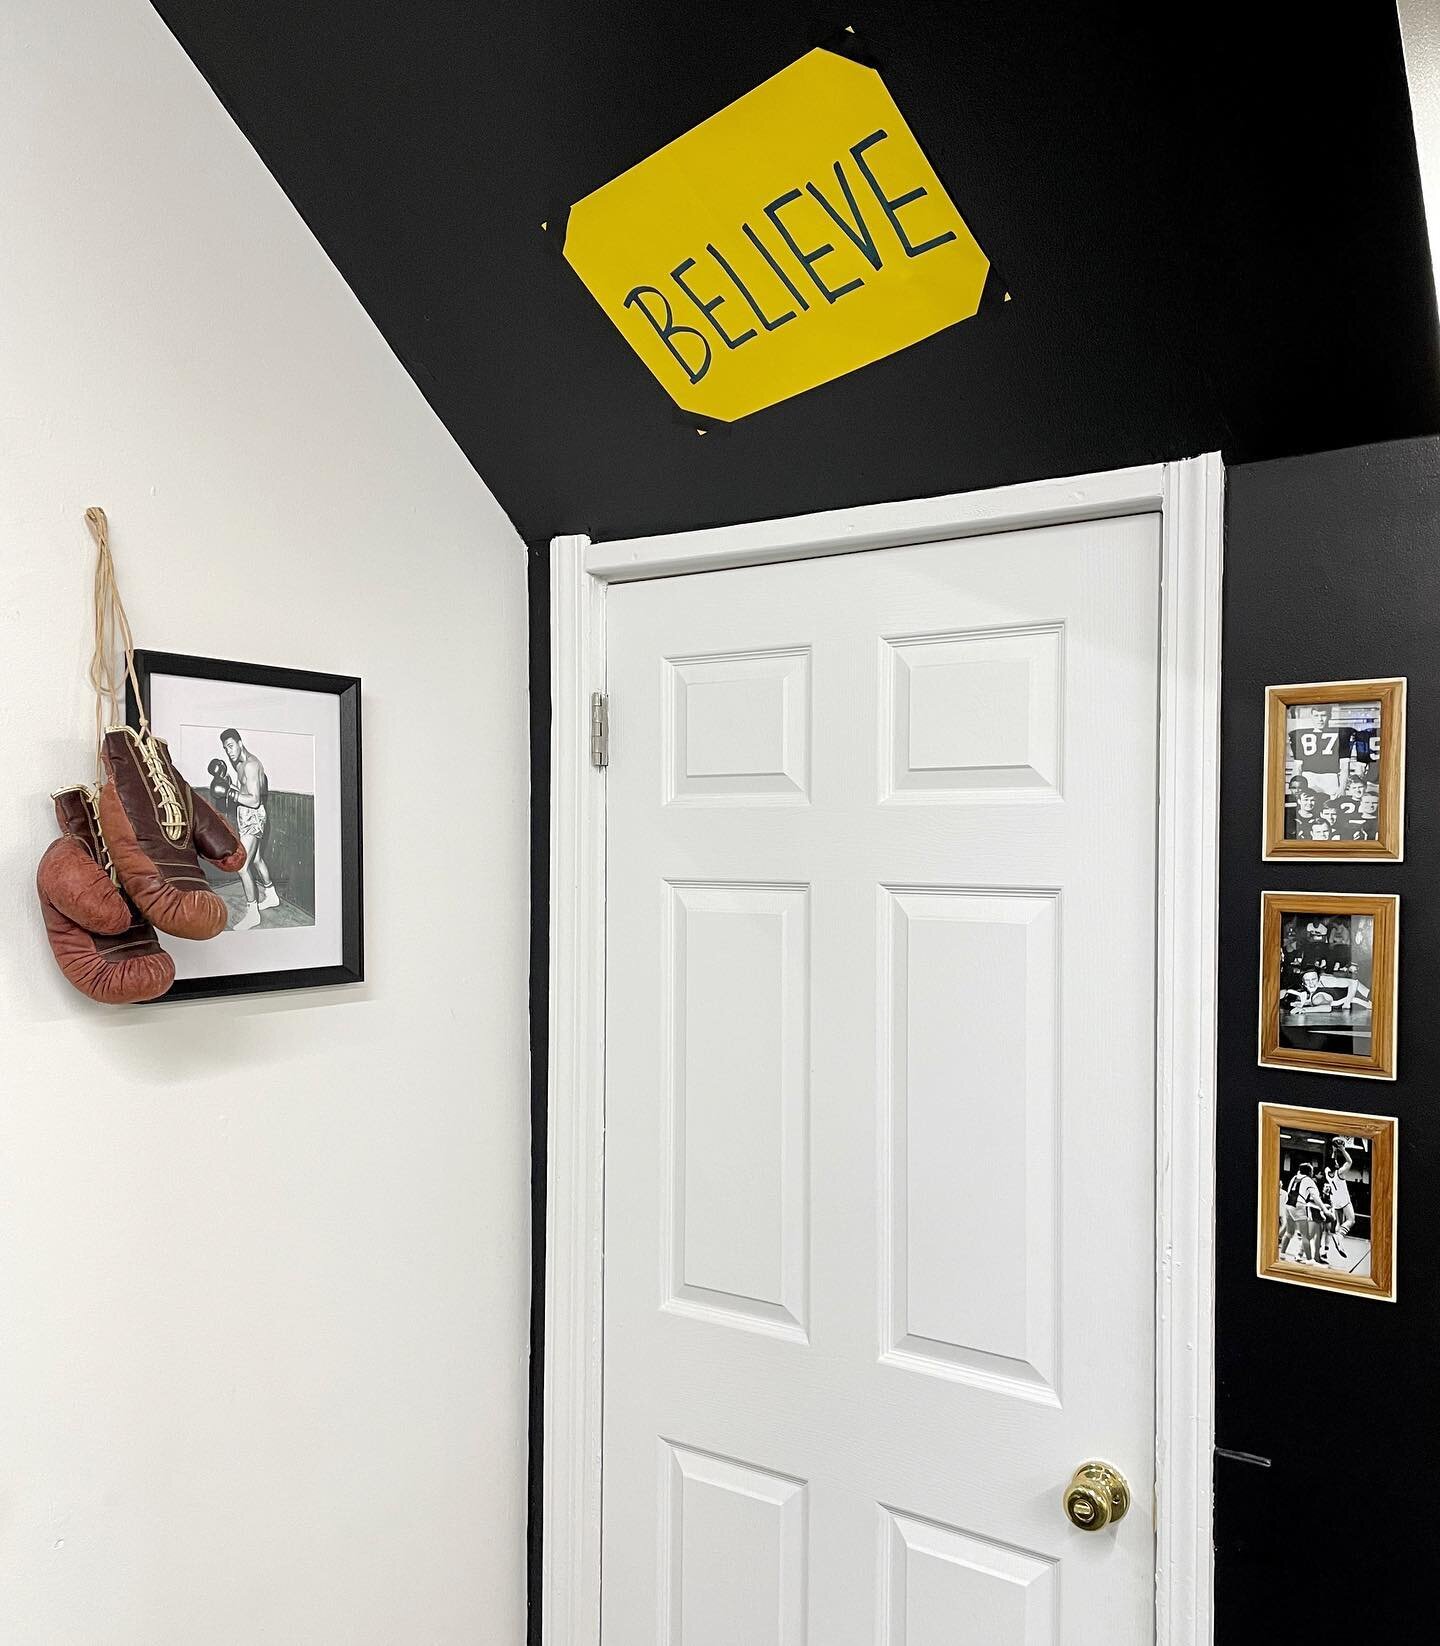 Ted Lasso and Muhammad Ali? Name a better duo. Our client Barry brought us this believe sign and it&rsquo;s the piece of the gym that we didn&rsquo;t know we were missing! @officialtedlasso #believe #footballislife #gymmotivation #tedlasso #saturdaym